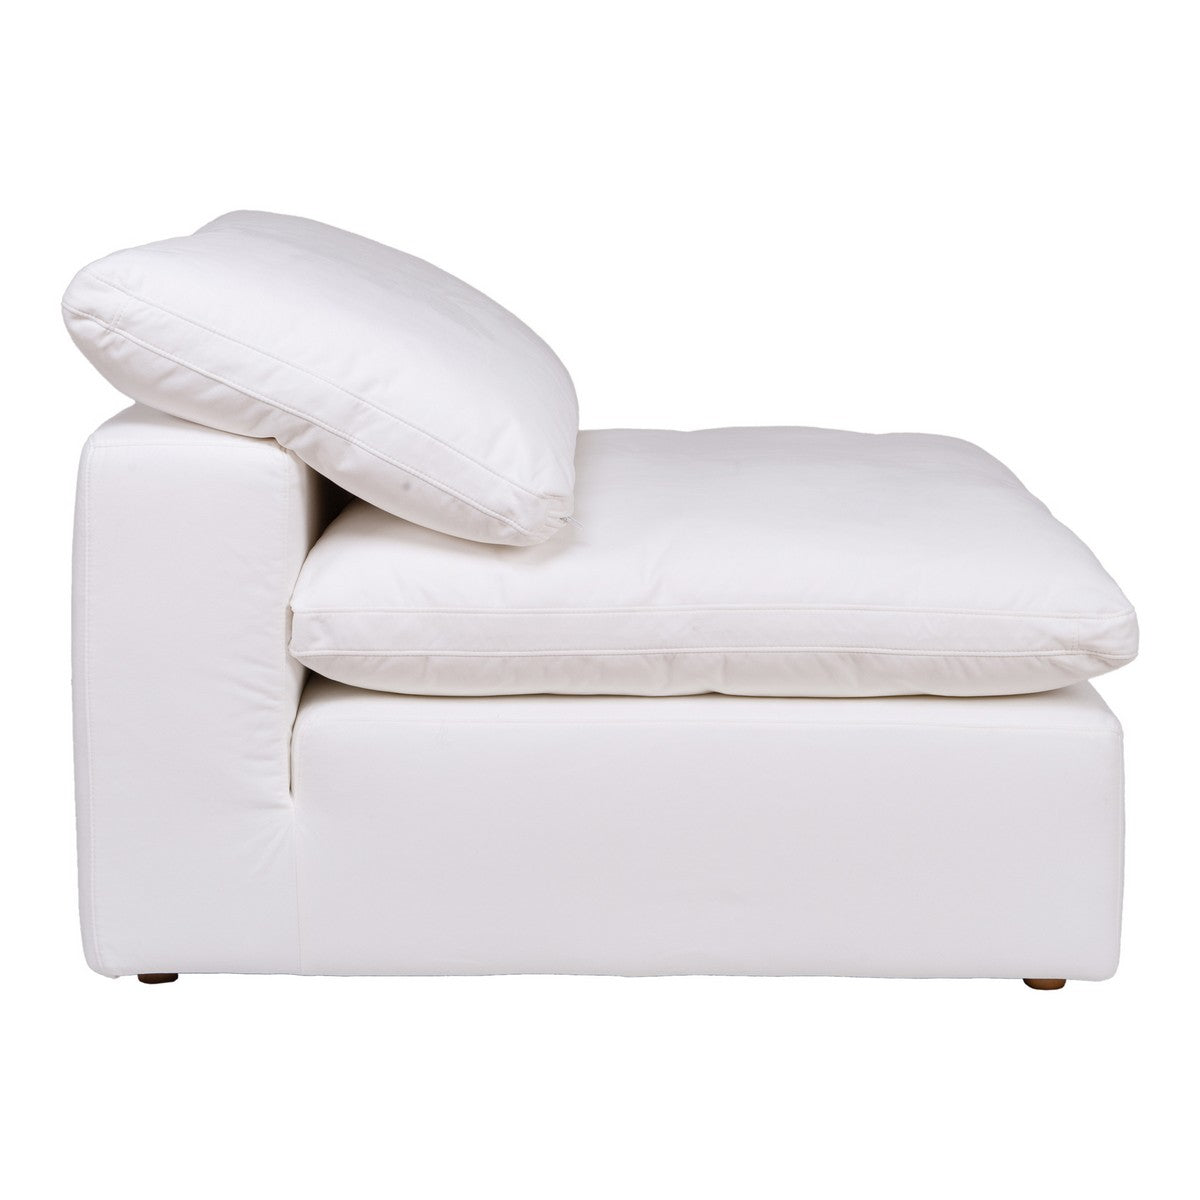 Moe's Home Collection Clay Slipper Chair Livesmart Fabric Cream - YJ-1001-05